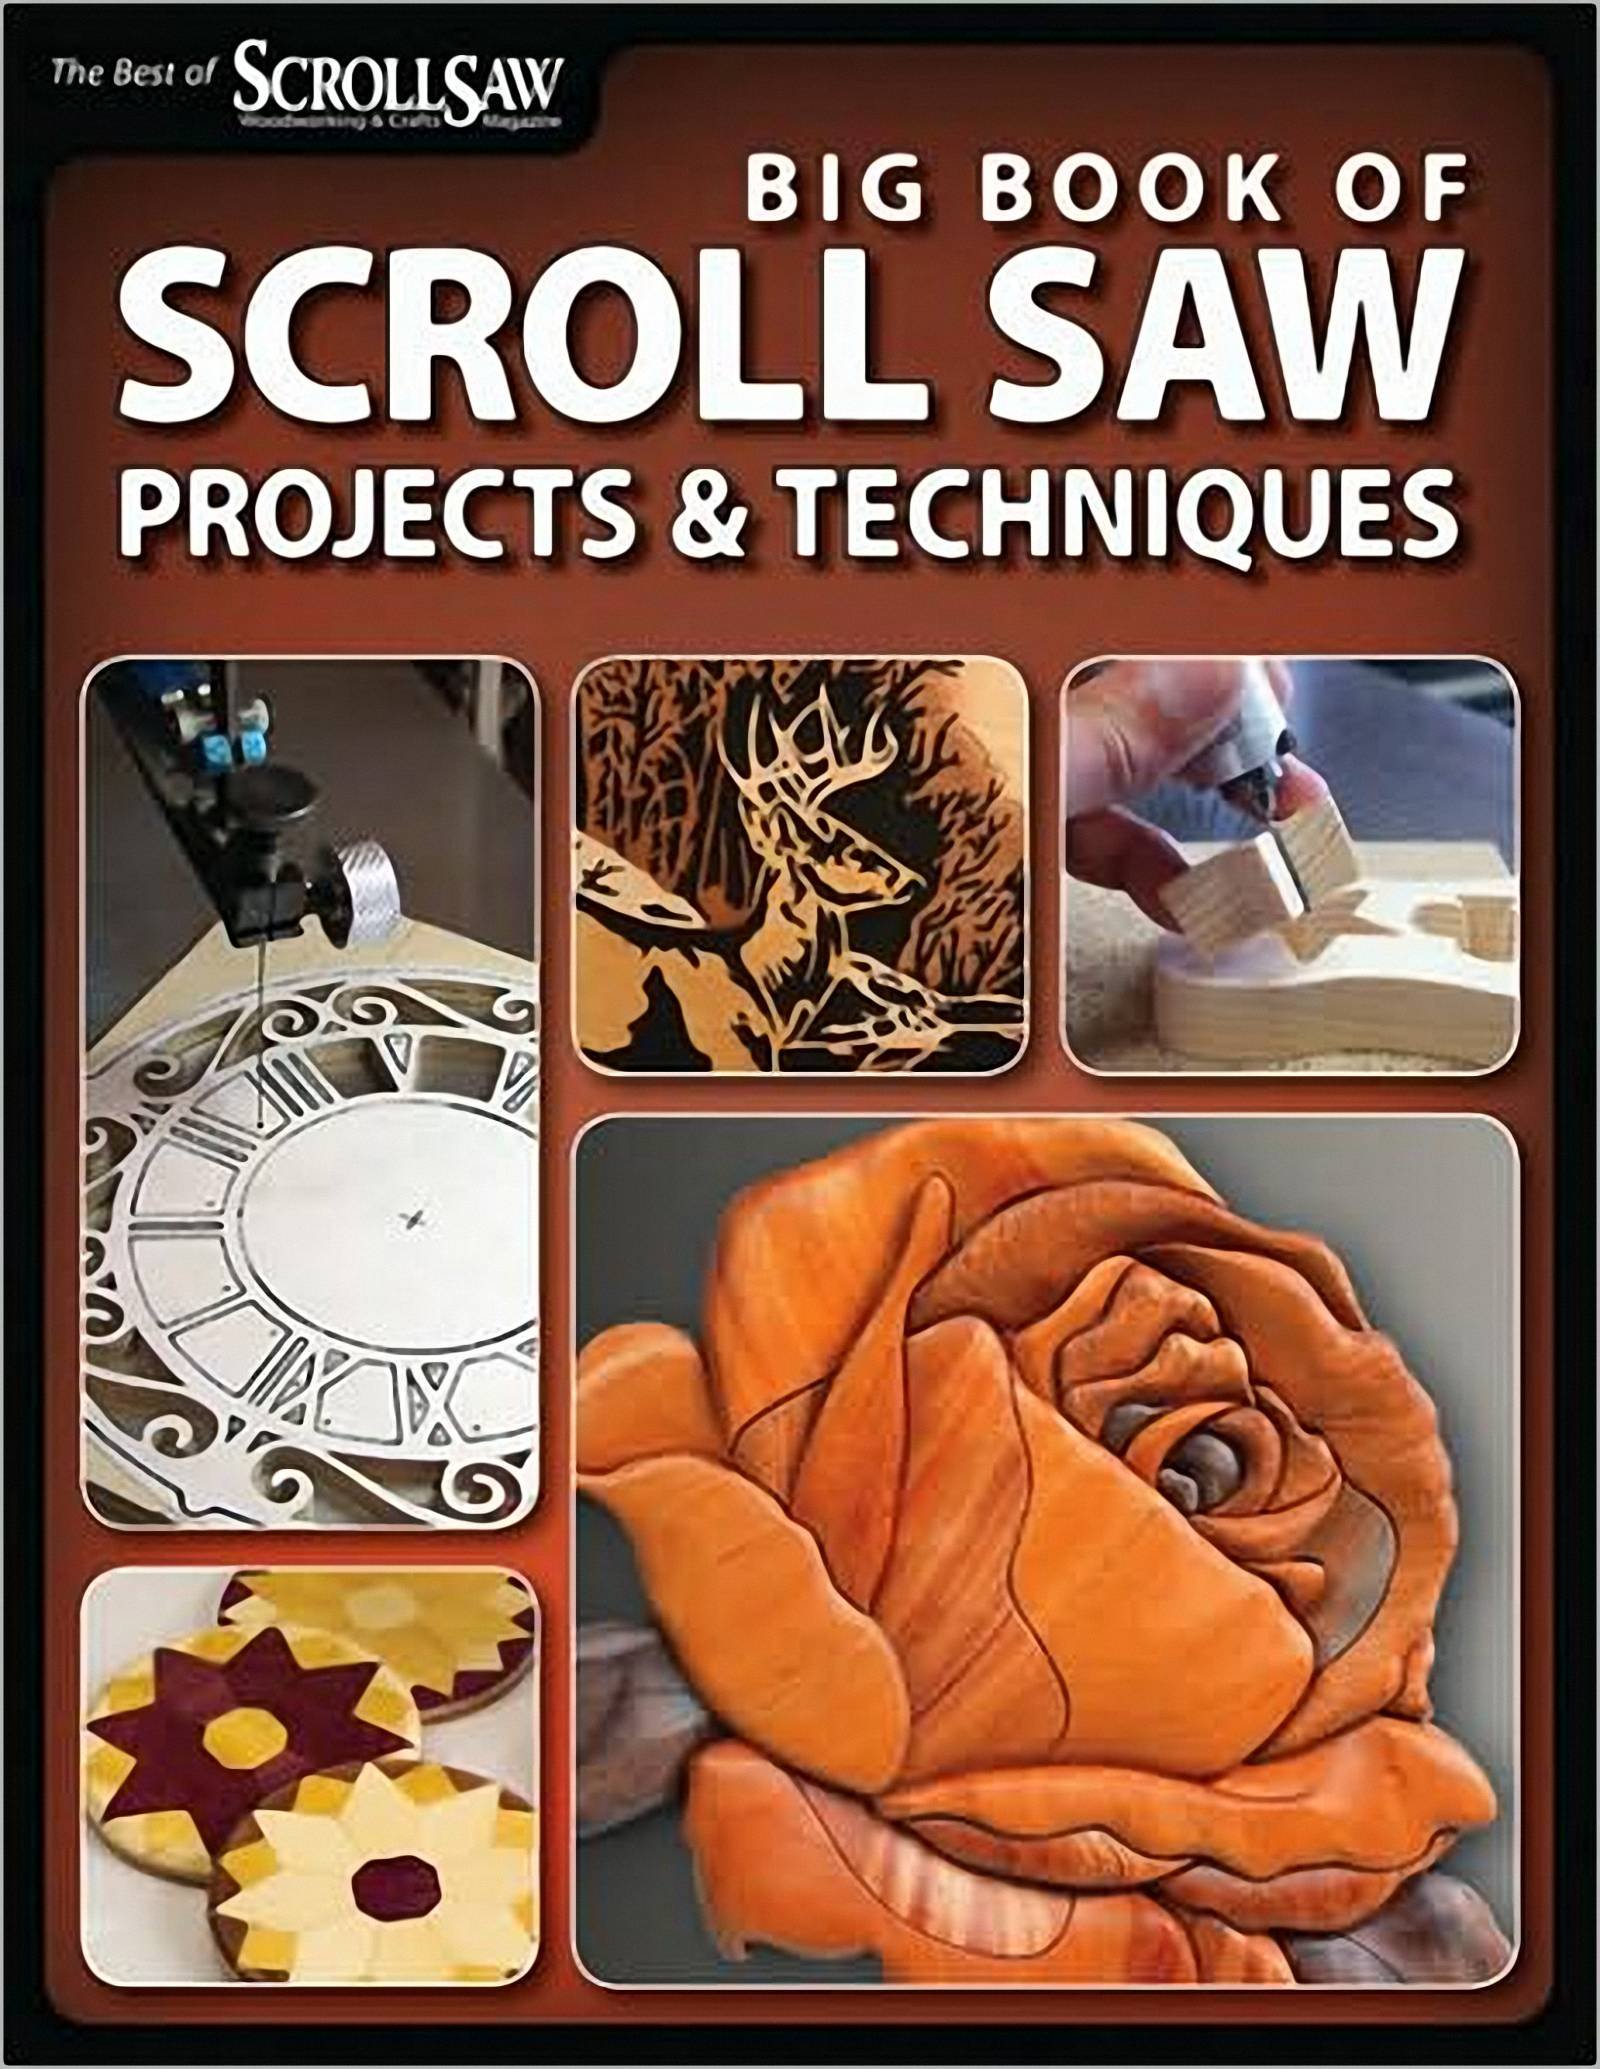 Big Book Of Scroll Saw Projects &amp; Techniques -2009- PDF ...